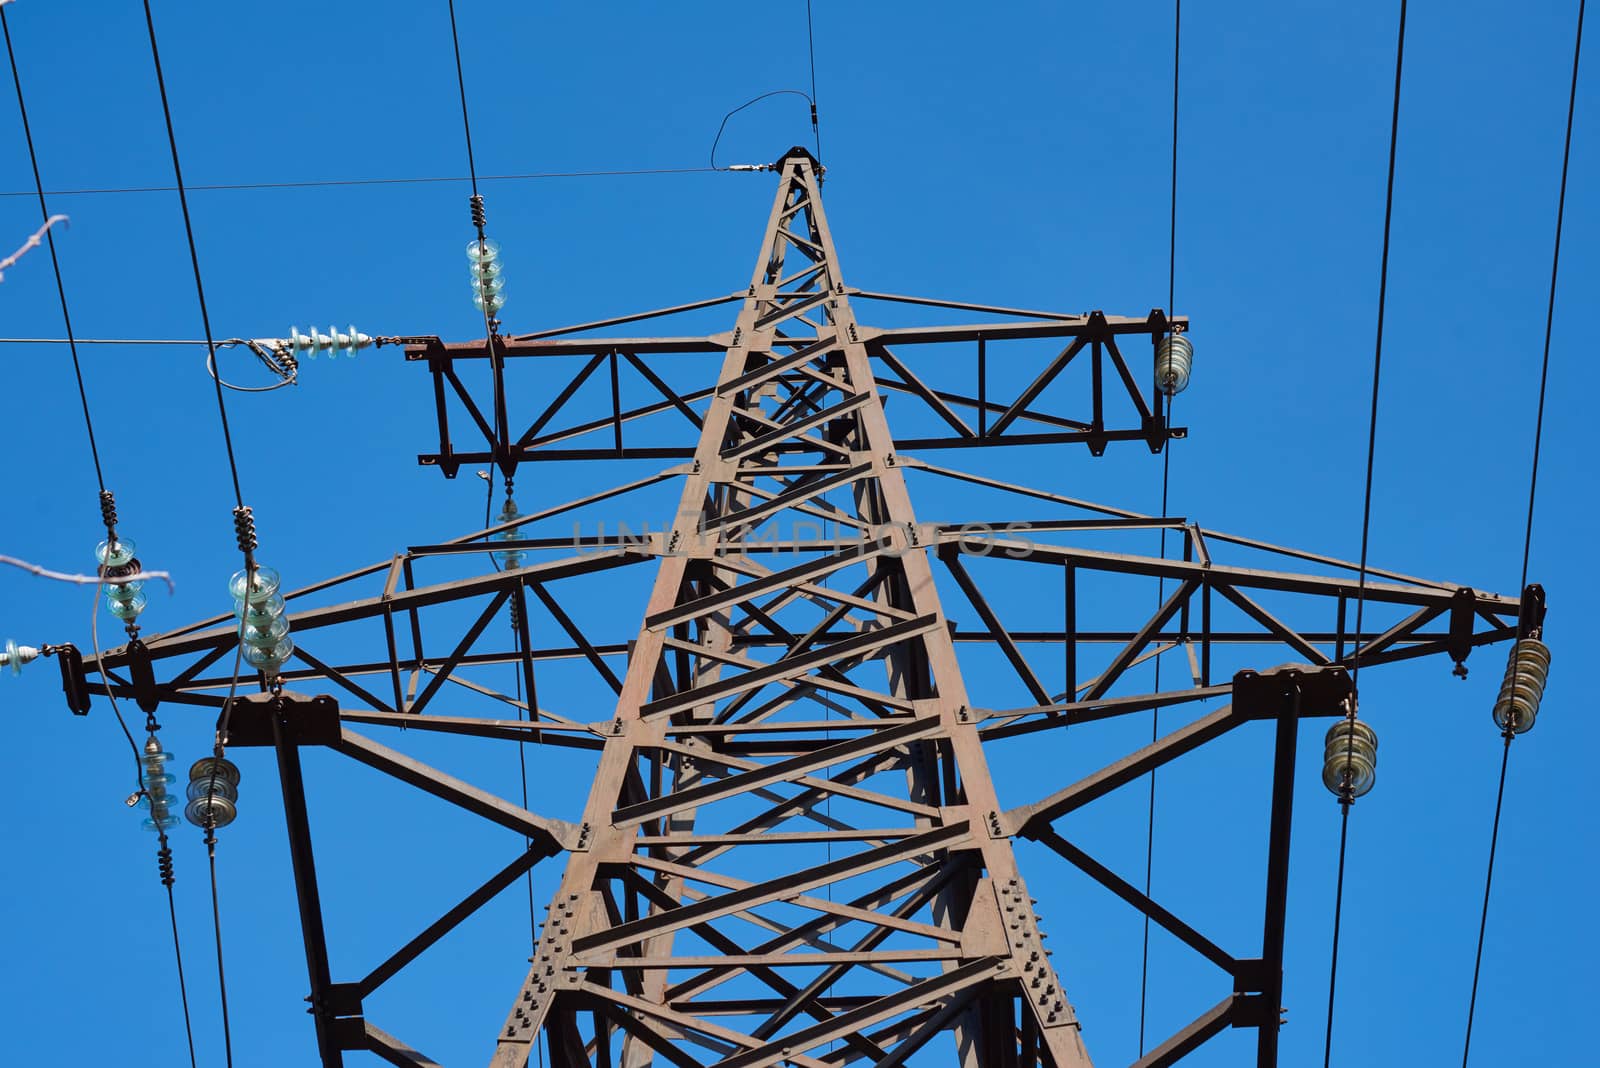 fragment of a metal tower with power lines against a blue sky